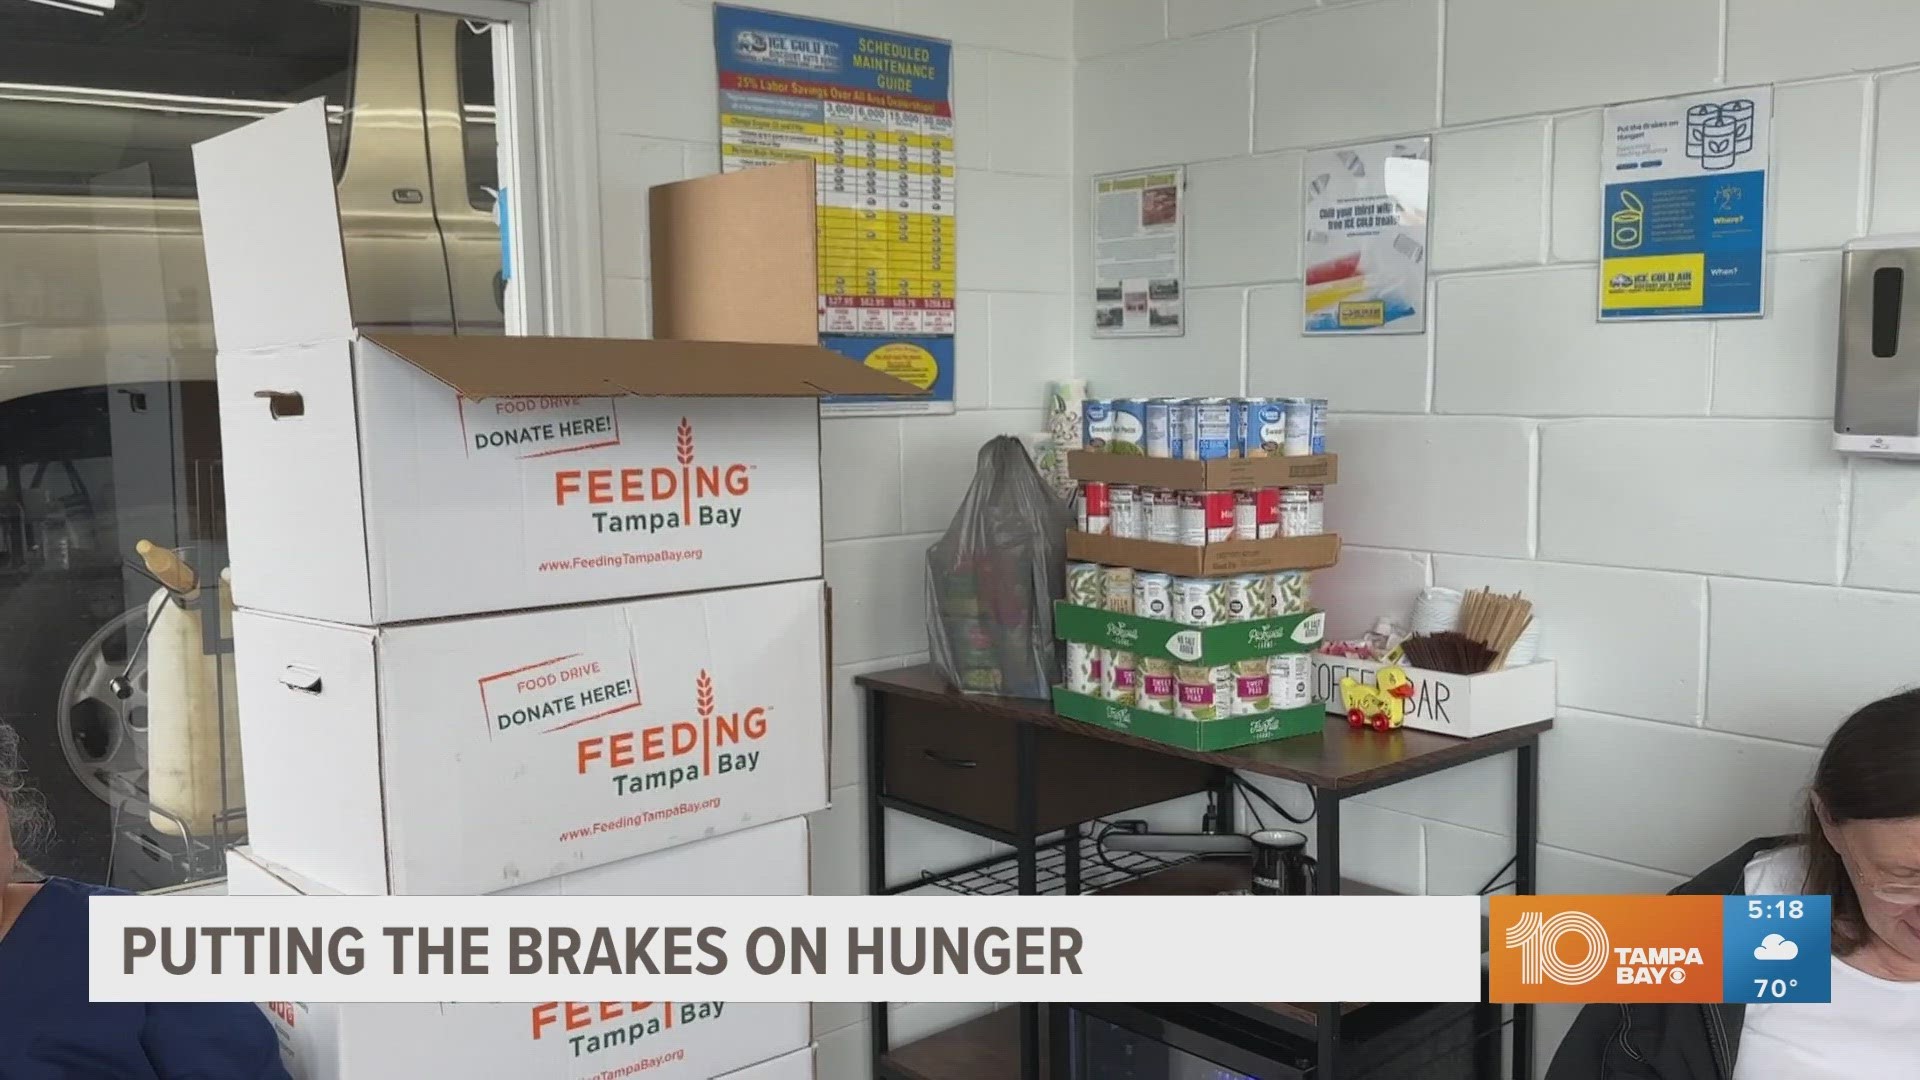 Ice Cold Air locations on Sligh Avenue in Tampa and in Port Richey are offering free brake pads and service to people who bring in 24 non-perishable food items.